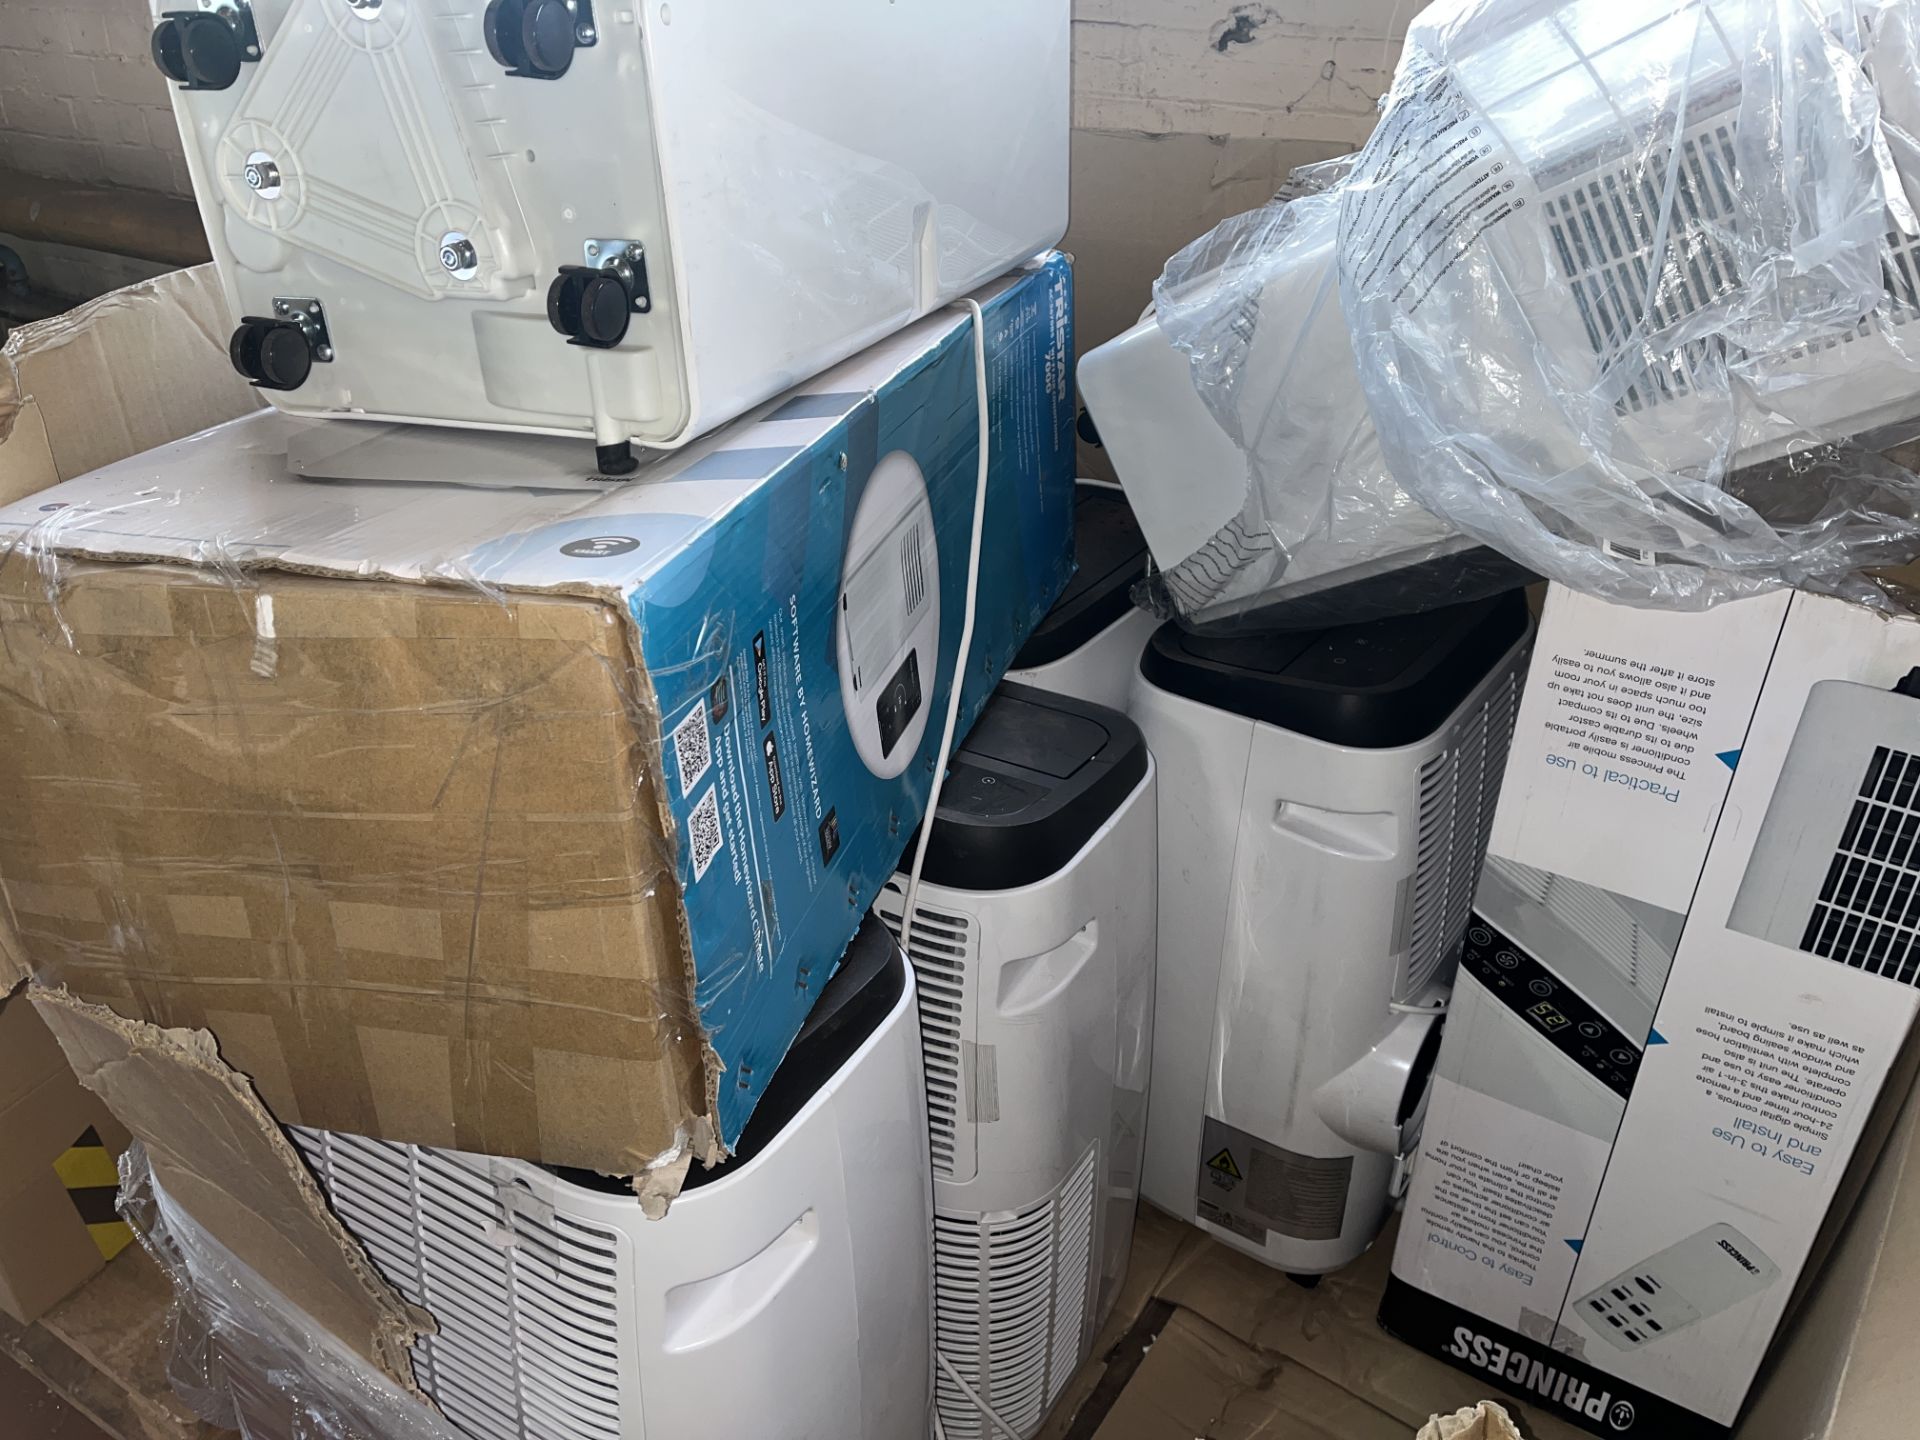 2 X 7000BTU AIR CONDITIONING UNITS (UNCHECKED, UNTESTED) R16-10